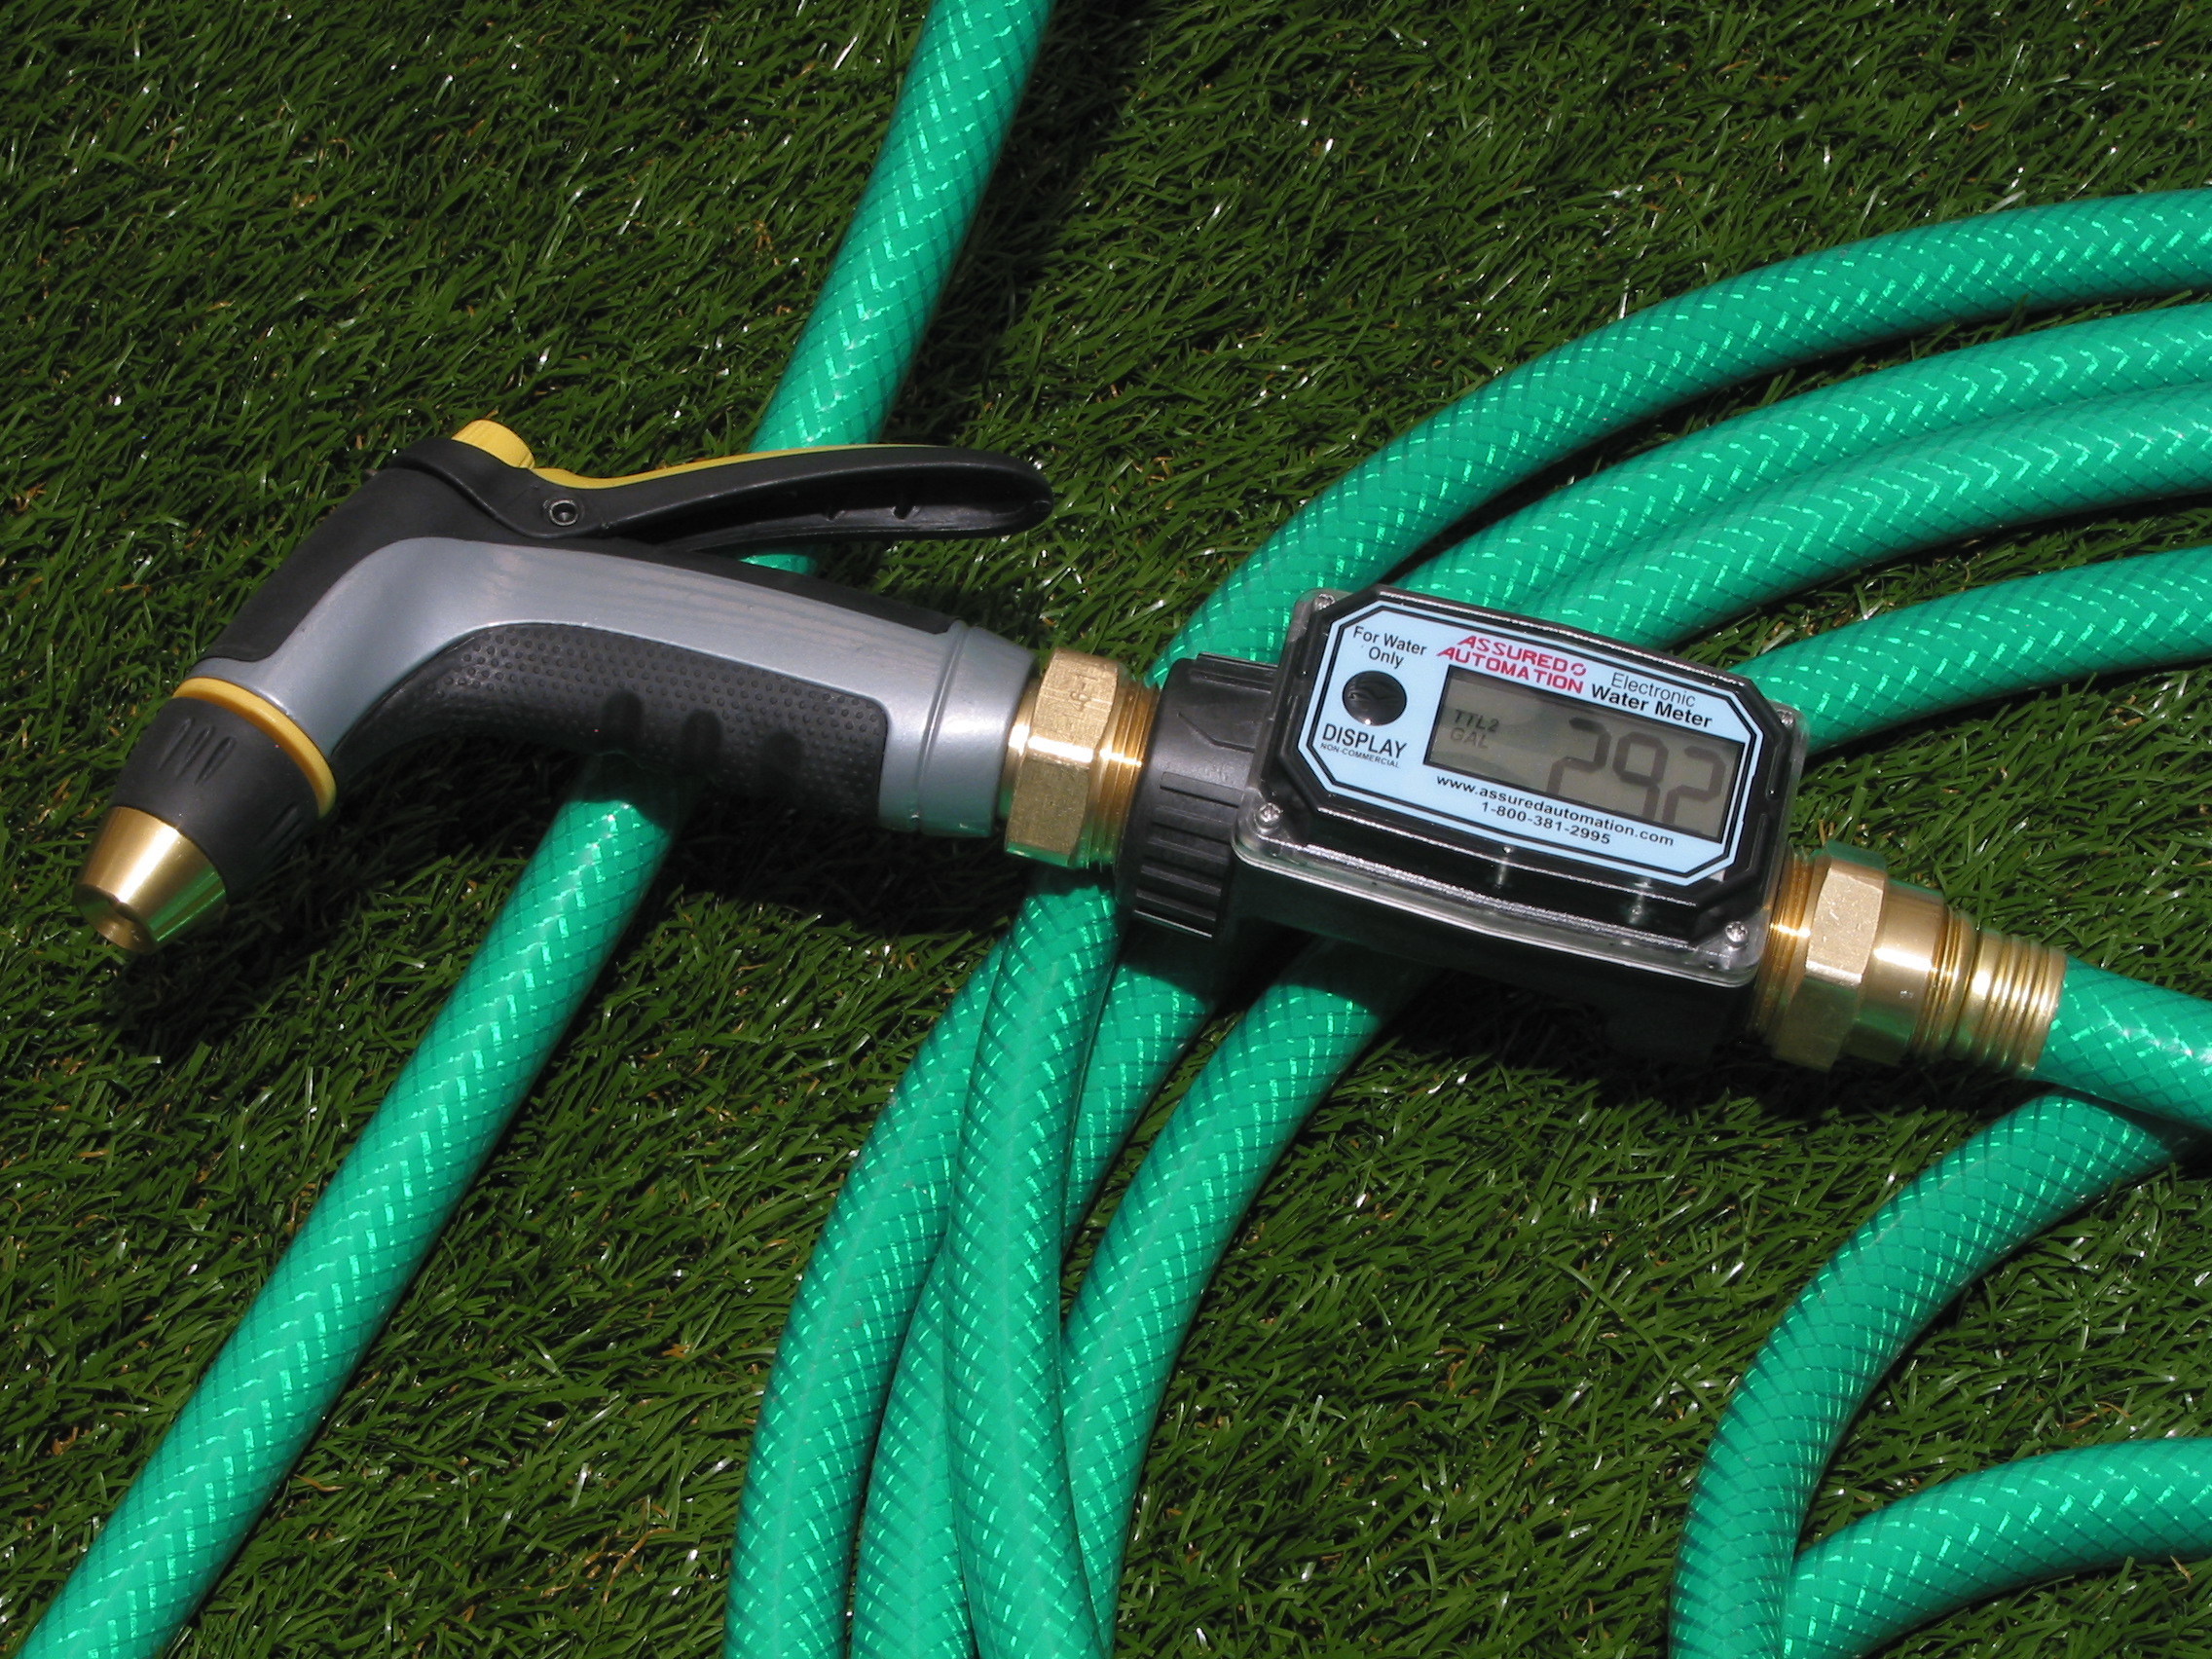 Digital And Mechanical Garden Hose Water Meters Take Control Of Water Usage With A Flow Meter From Assured Automation